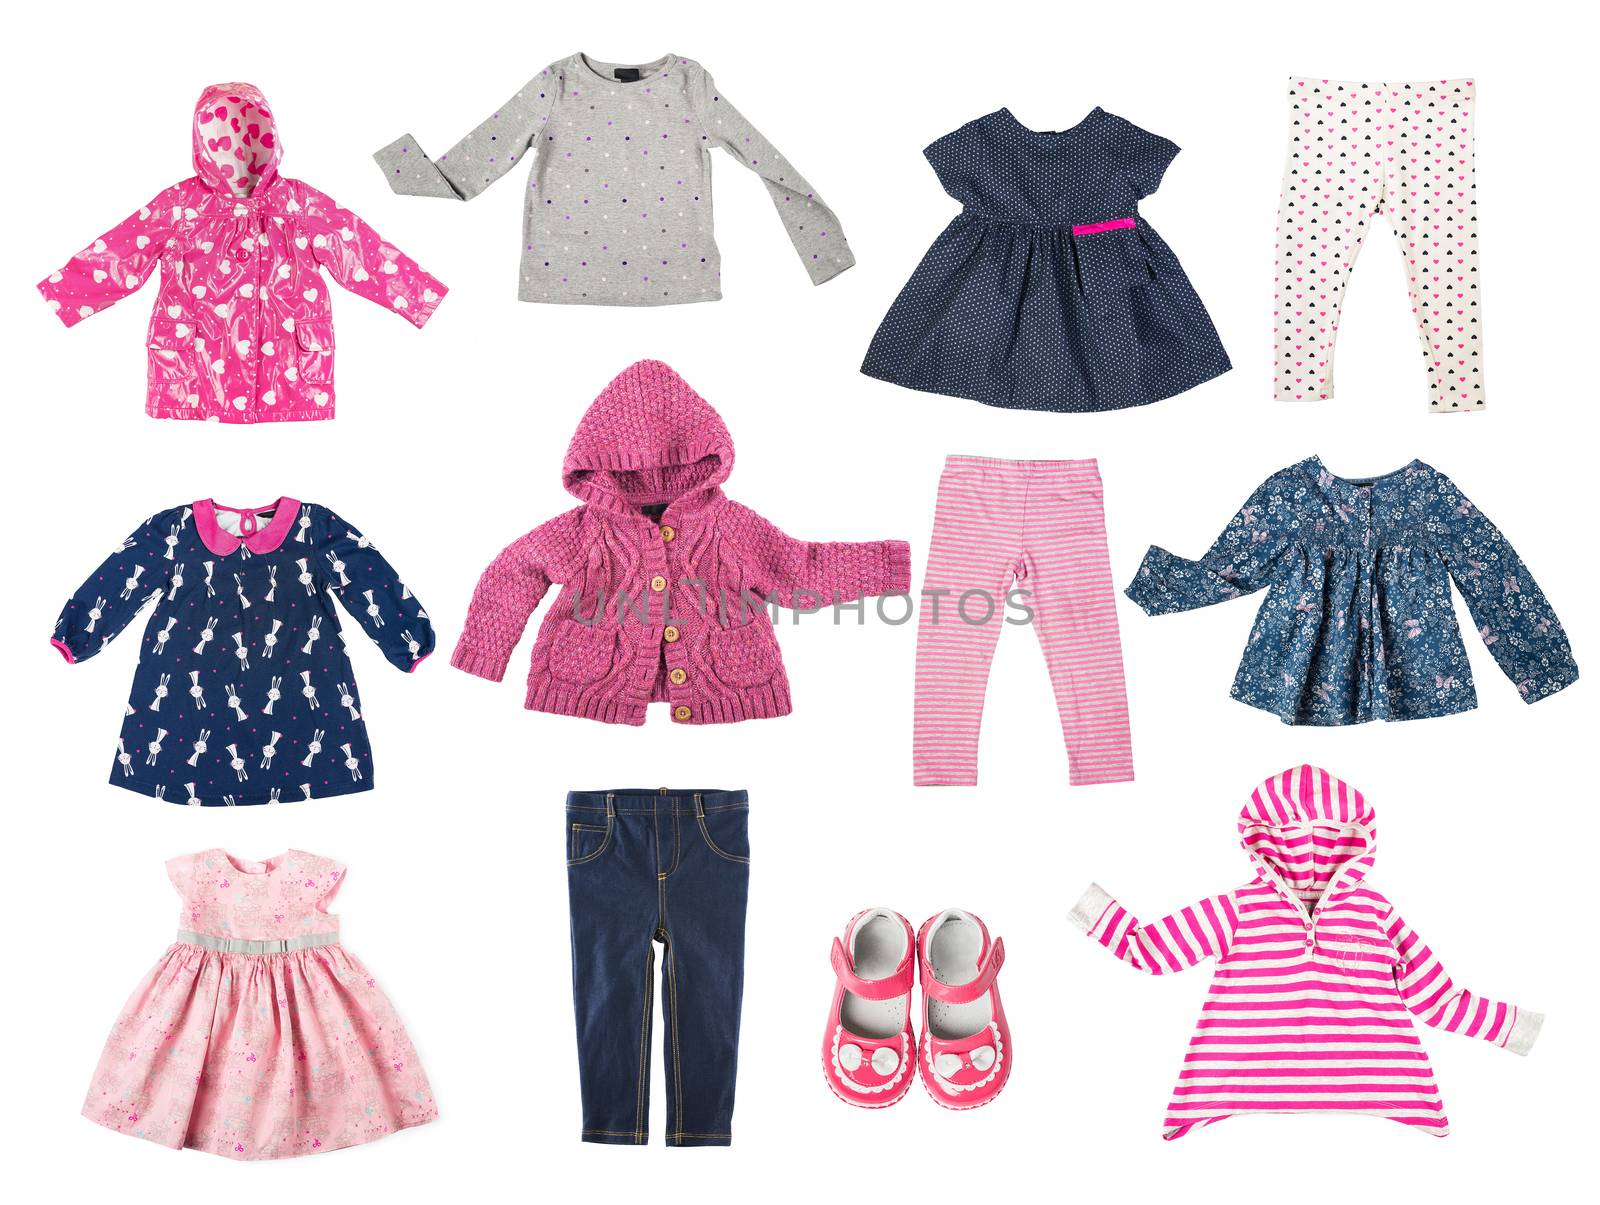 Set of different children's clothes, shirts, jacket, shirt, pants, shoes, dresses, baby's wardrobe isolated on white background